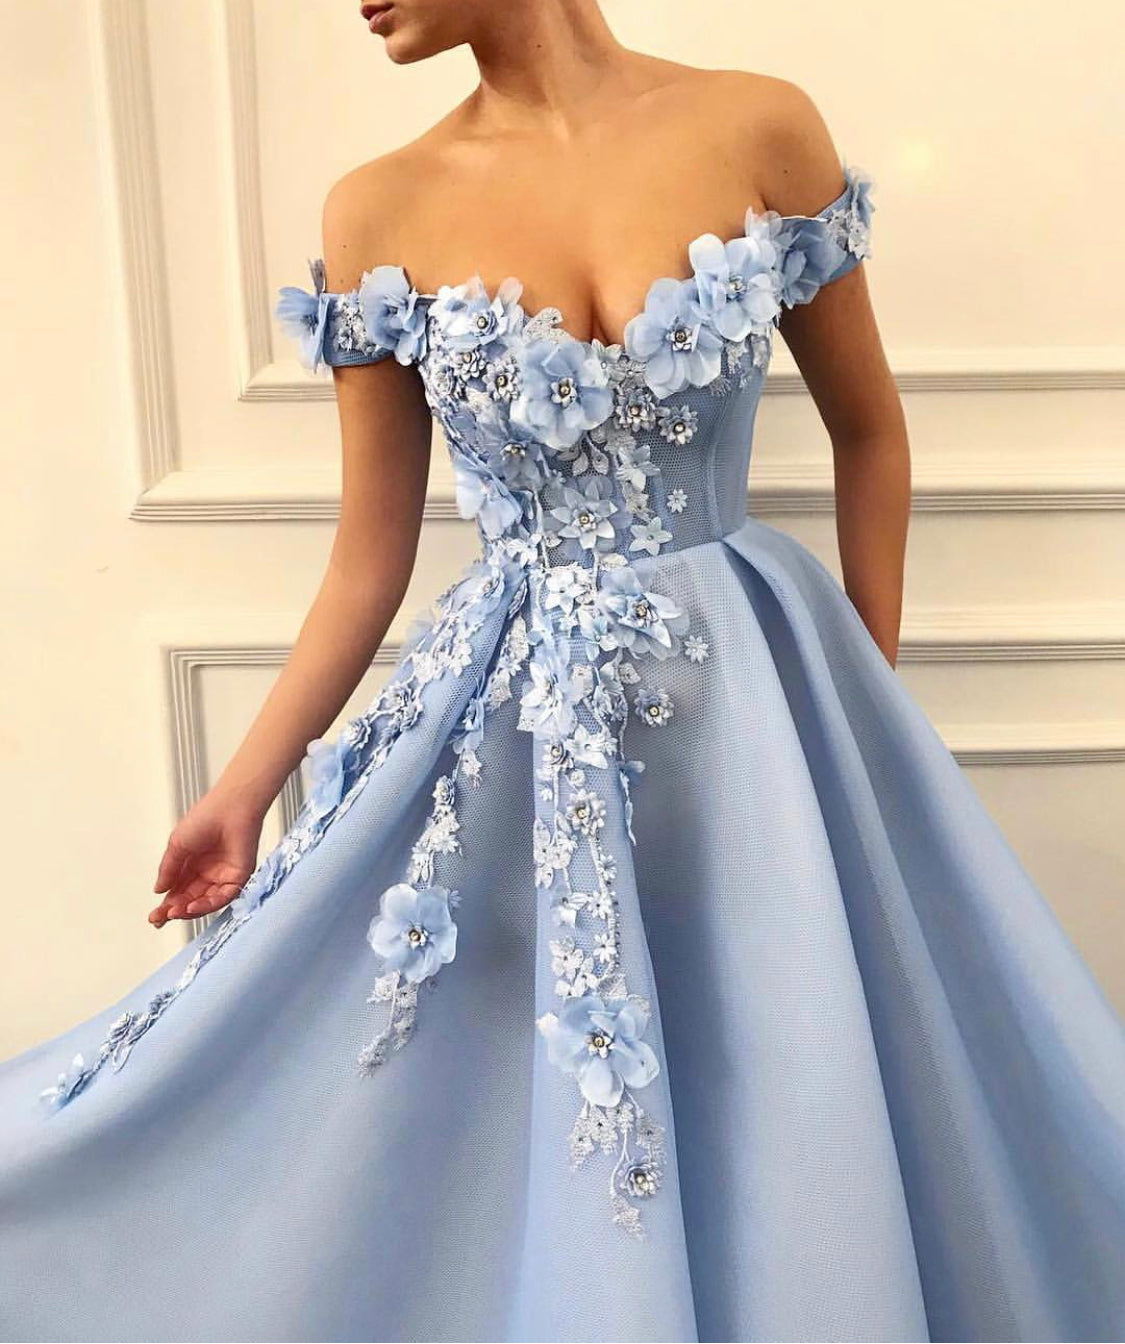 Blue A-Line dress with off the shoulder sleeves and embroidered flowers